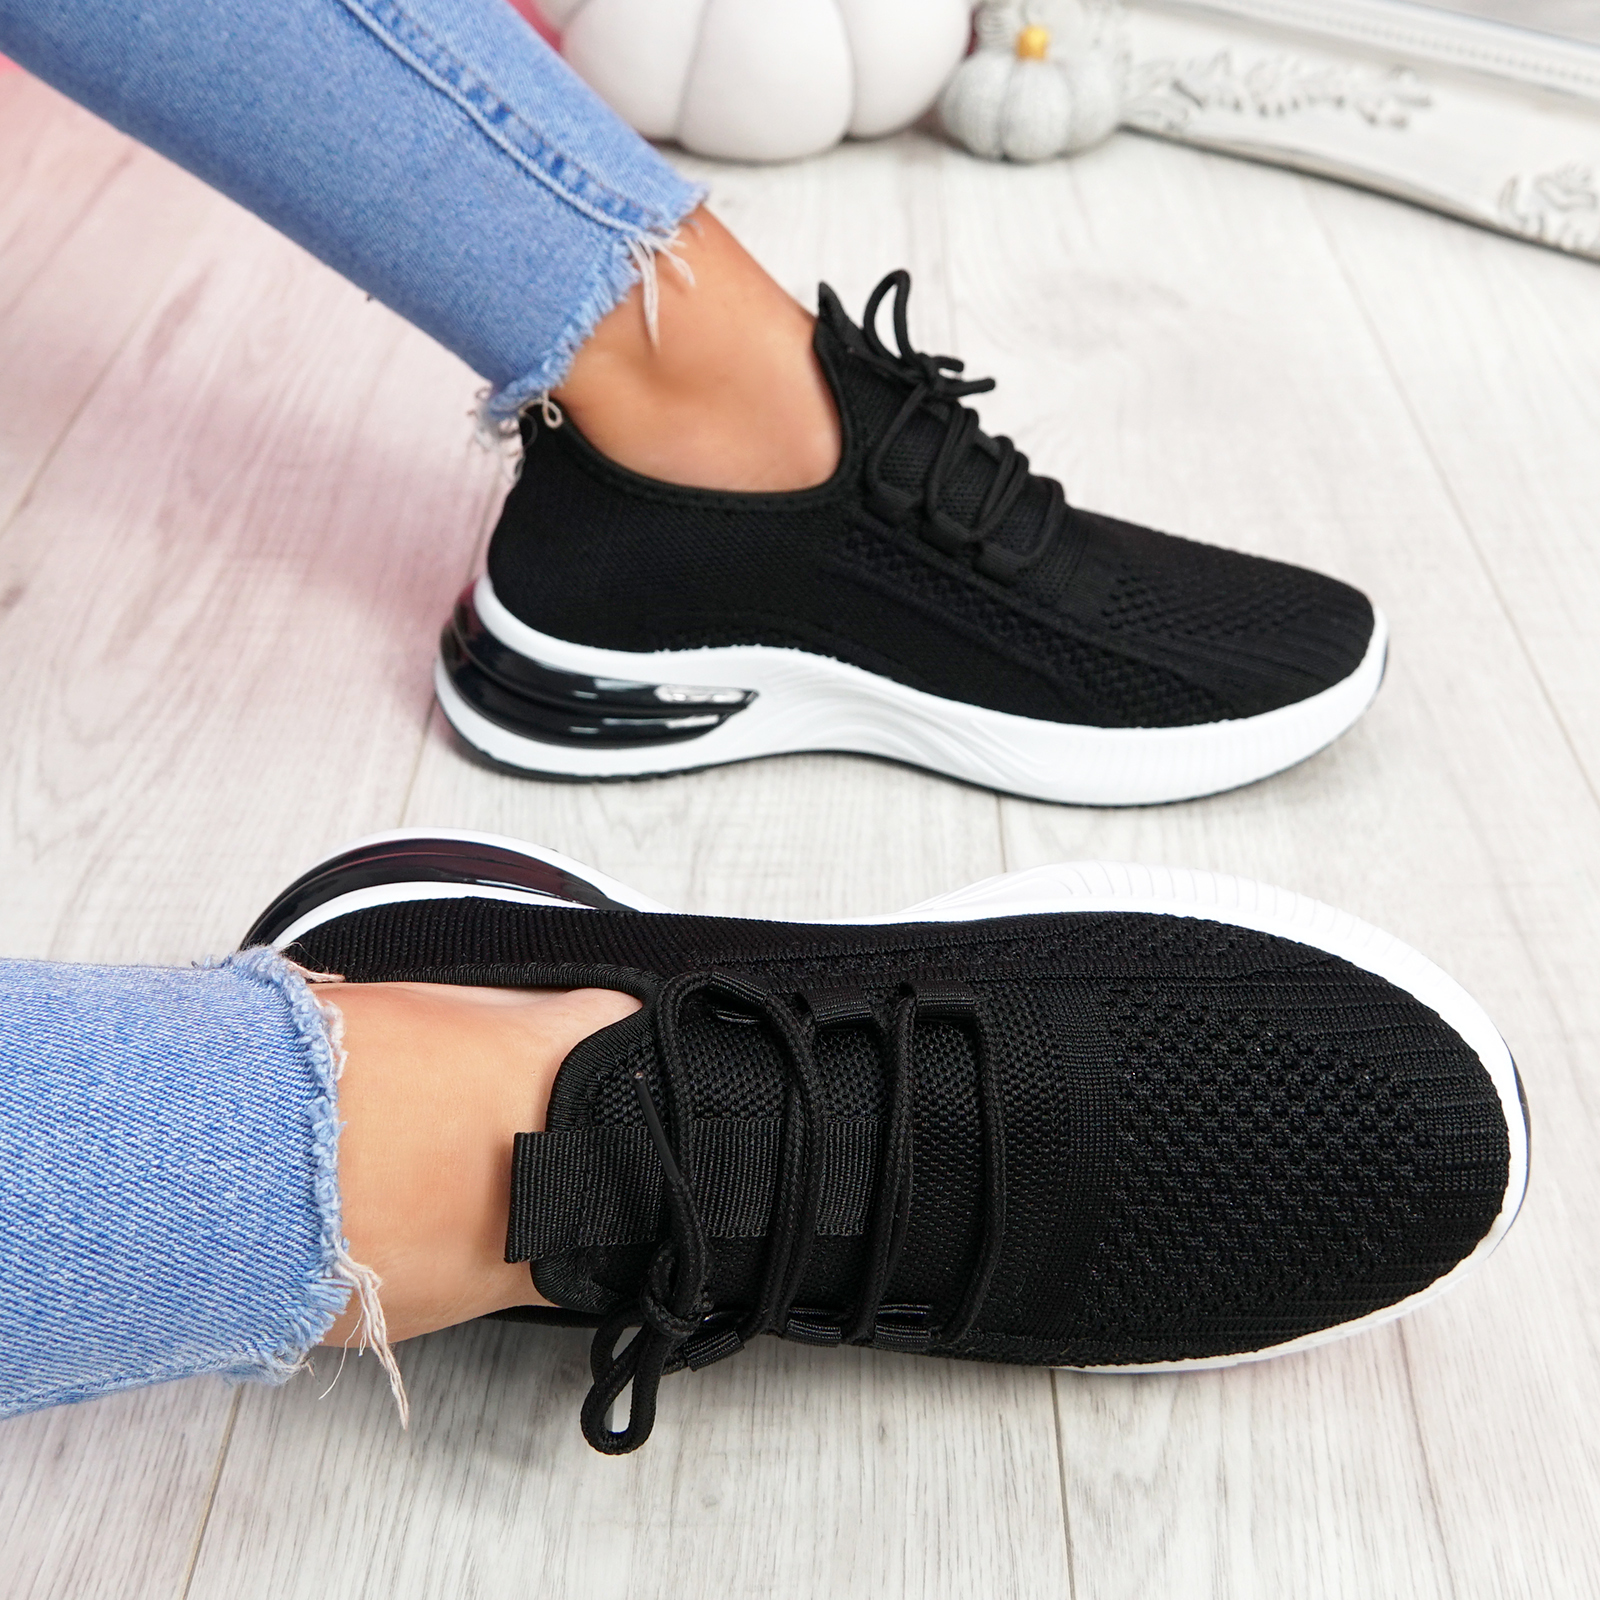 WOMENS LADIES LACE UP SPORT GYM TRAINERS RUNNING SNEAKERS KNIT WOMEN ...